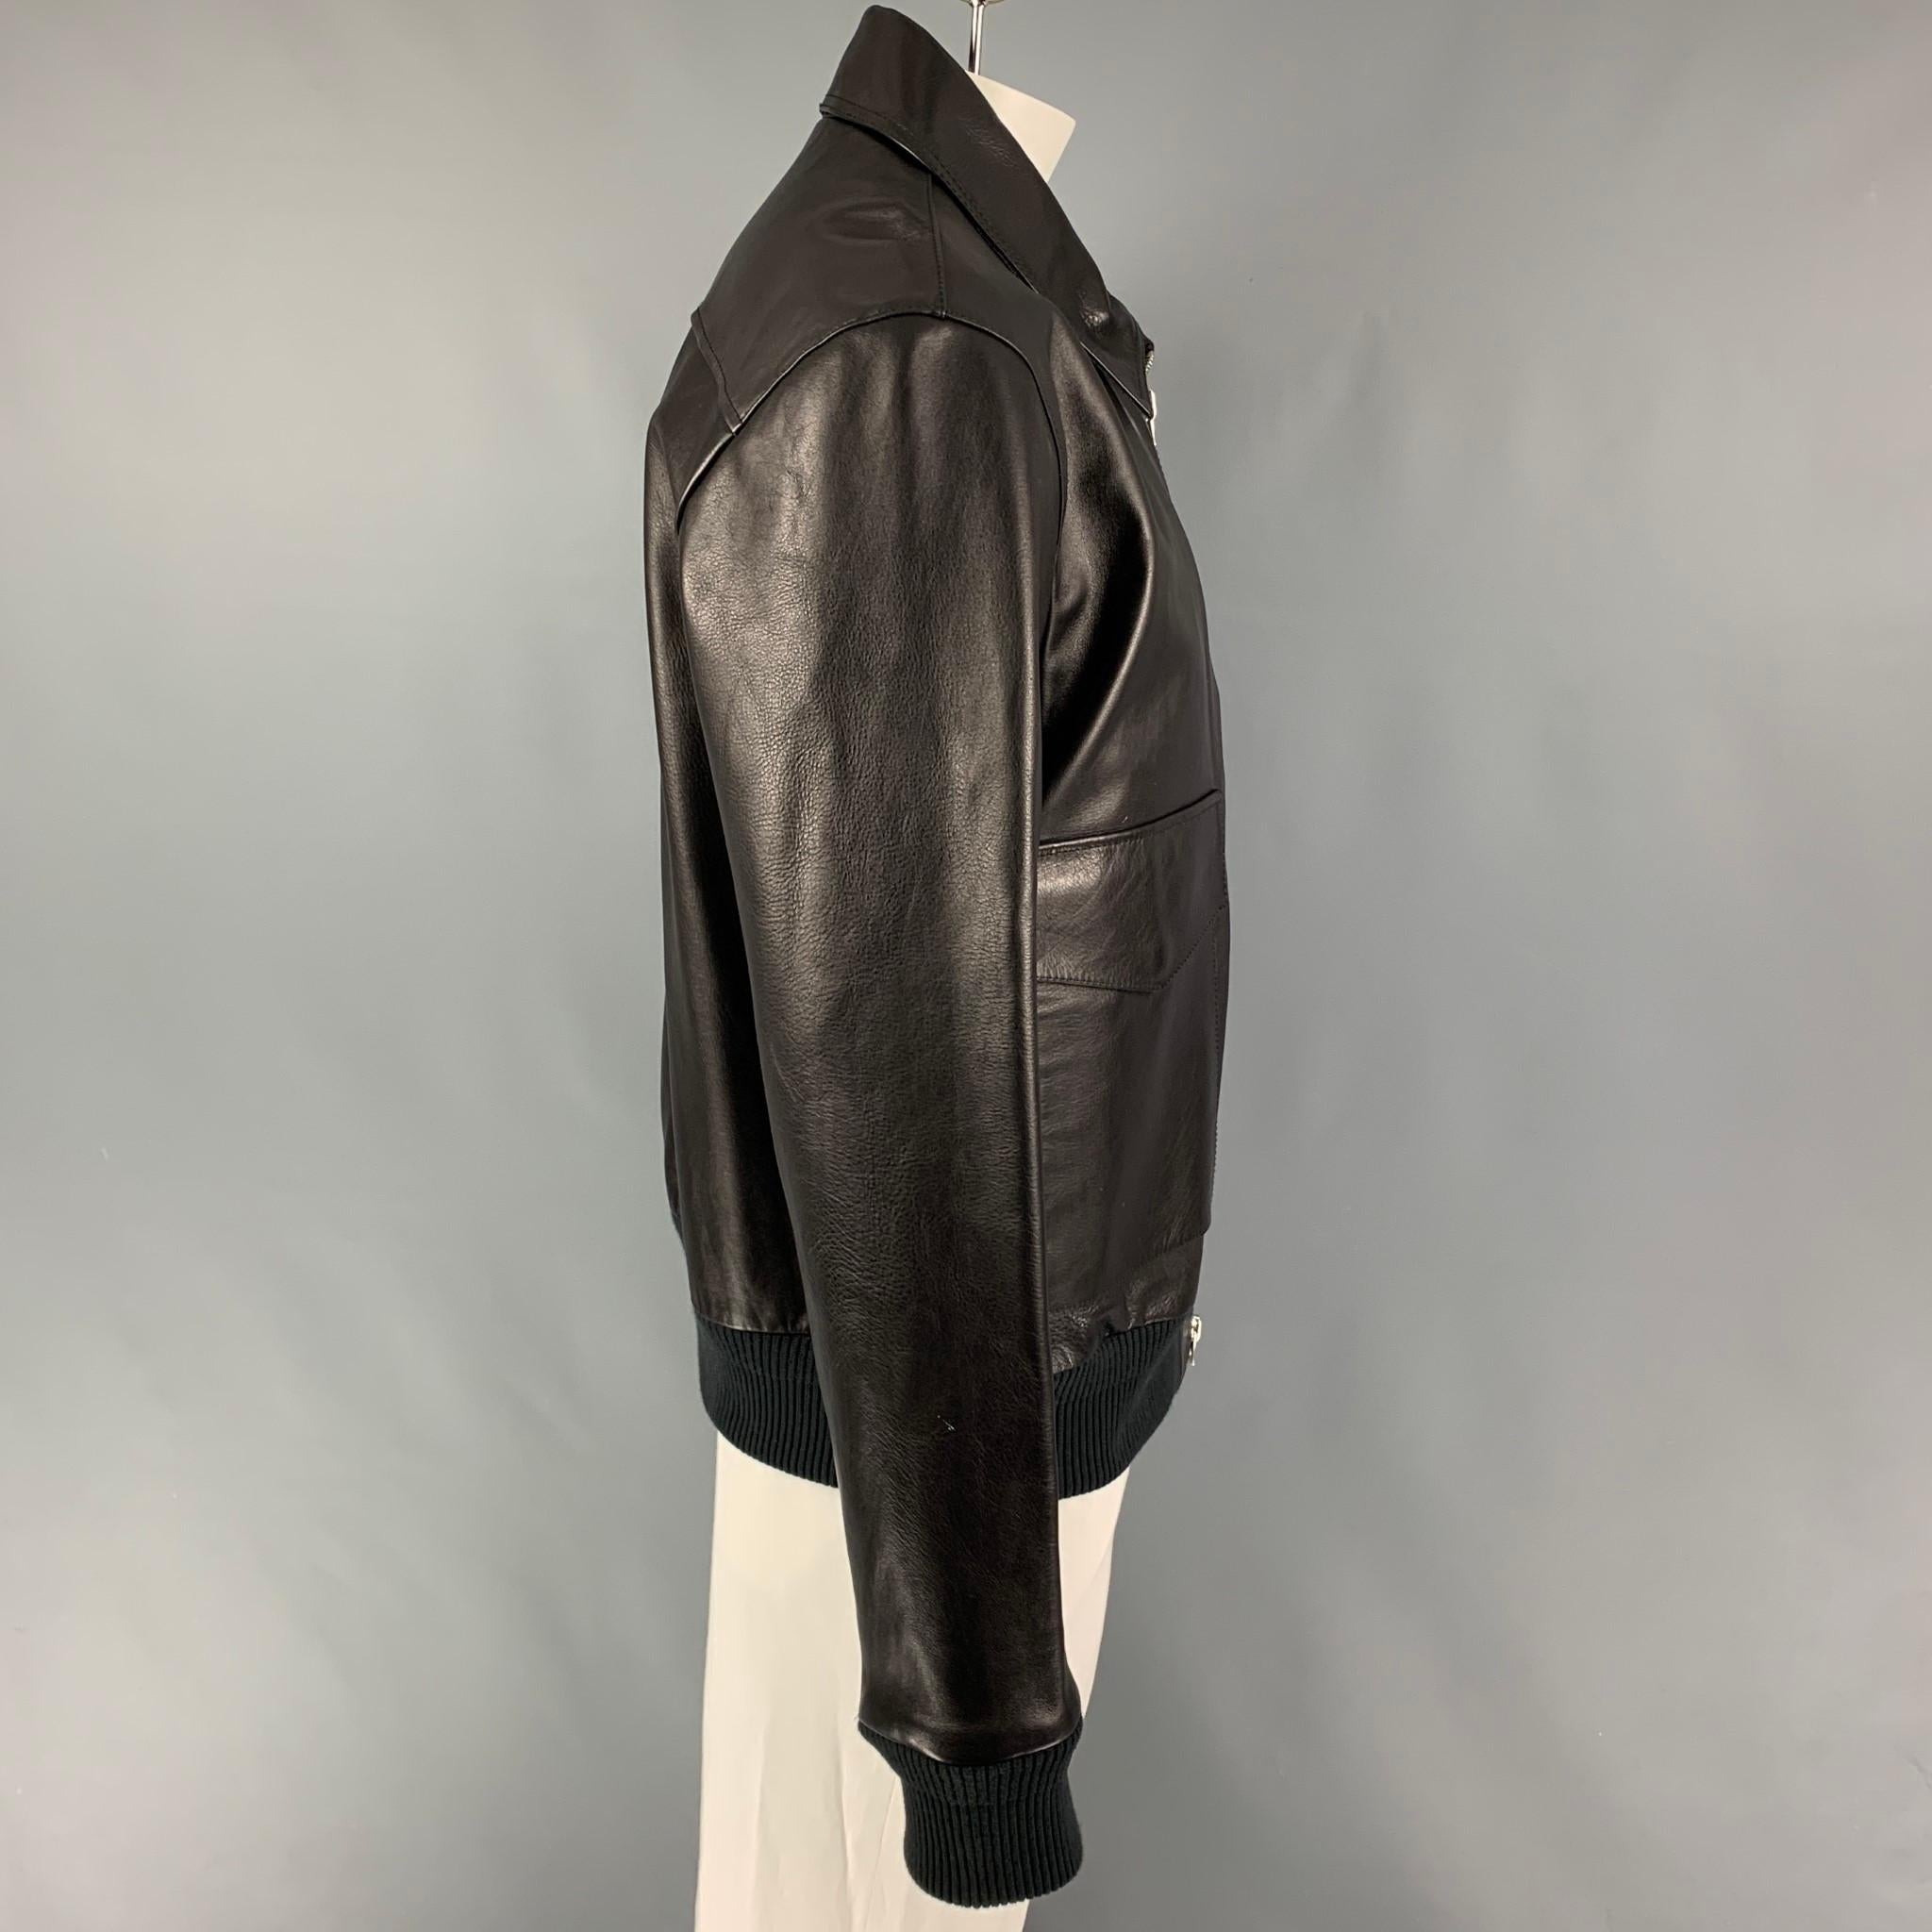 ACNE STUDIOS jacket comes in a black leather featuring a bomber style, ribbed hem, patch pockets, spread collar, and a full zip up closure. 

Very Good Pre-Owned Condition.
Marked: 54
Original Retail Price: $1,300.00

Measurements:

Shoulder: 21